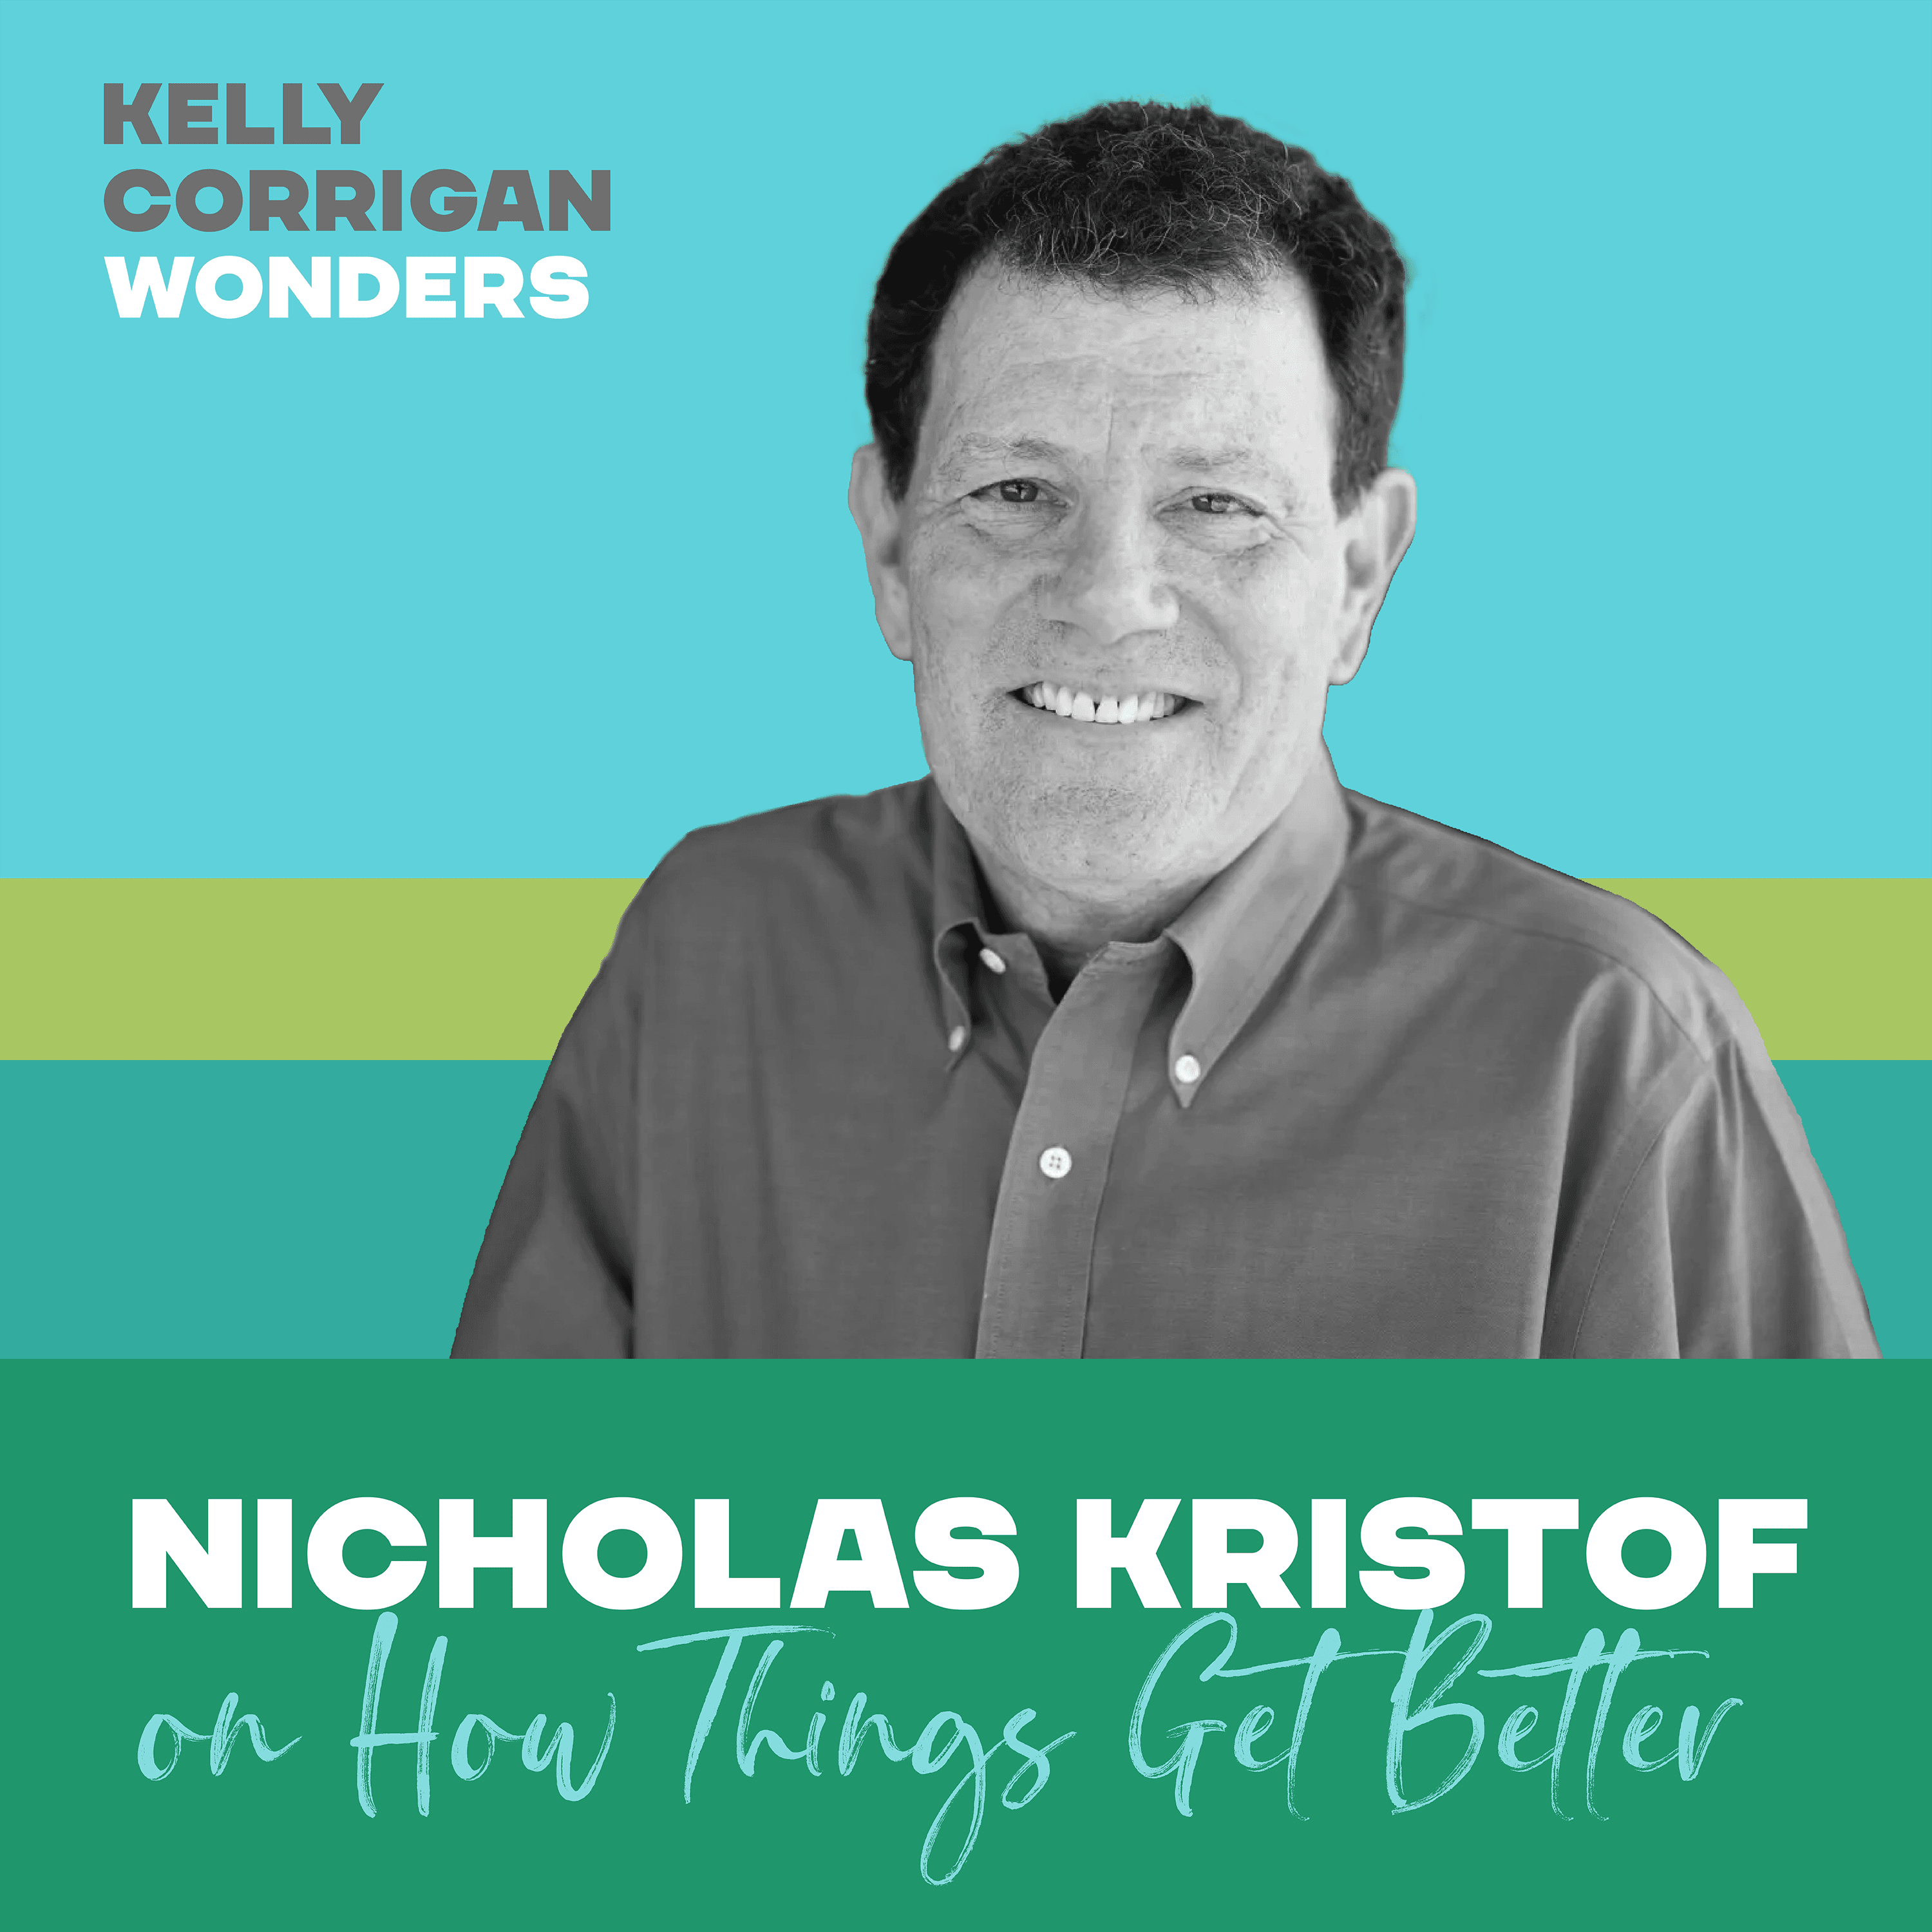 Thumbnail for "Going Deep on How Things Get Better with Nicholas Kristof".